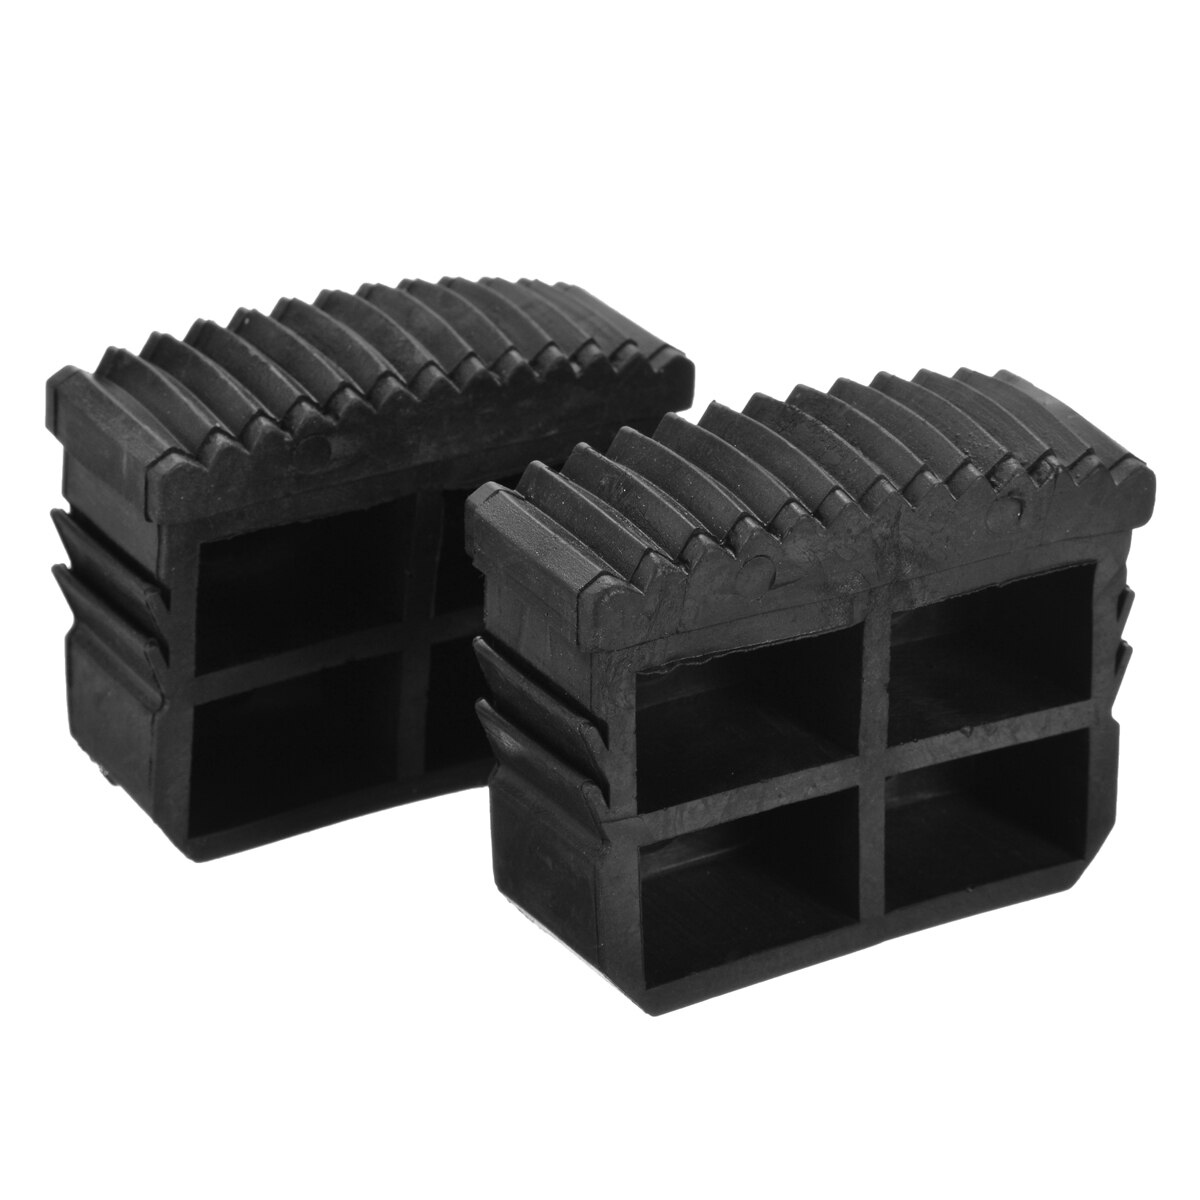 2pcs/set Black Rubber Replacement Step Ladder Feet Non Slip Ladder Plug Foot Pad For Ladder Accessories